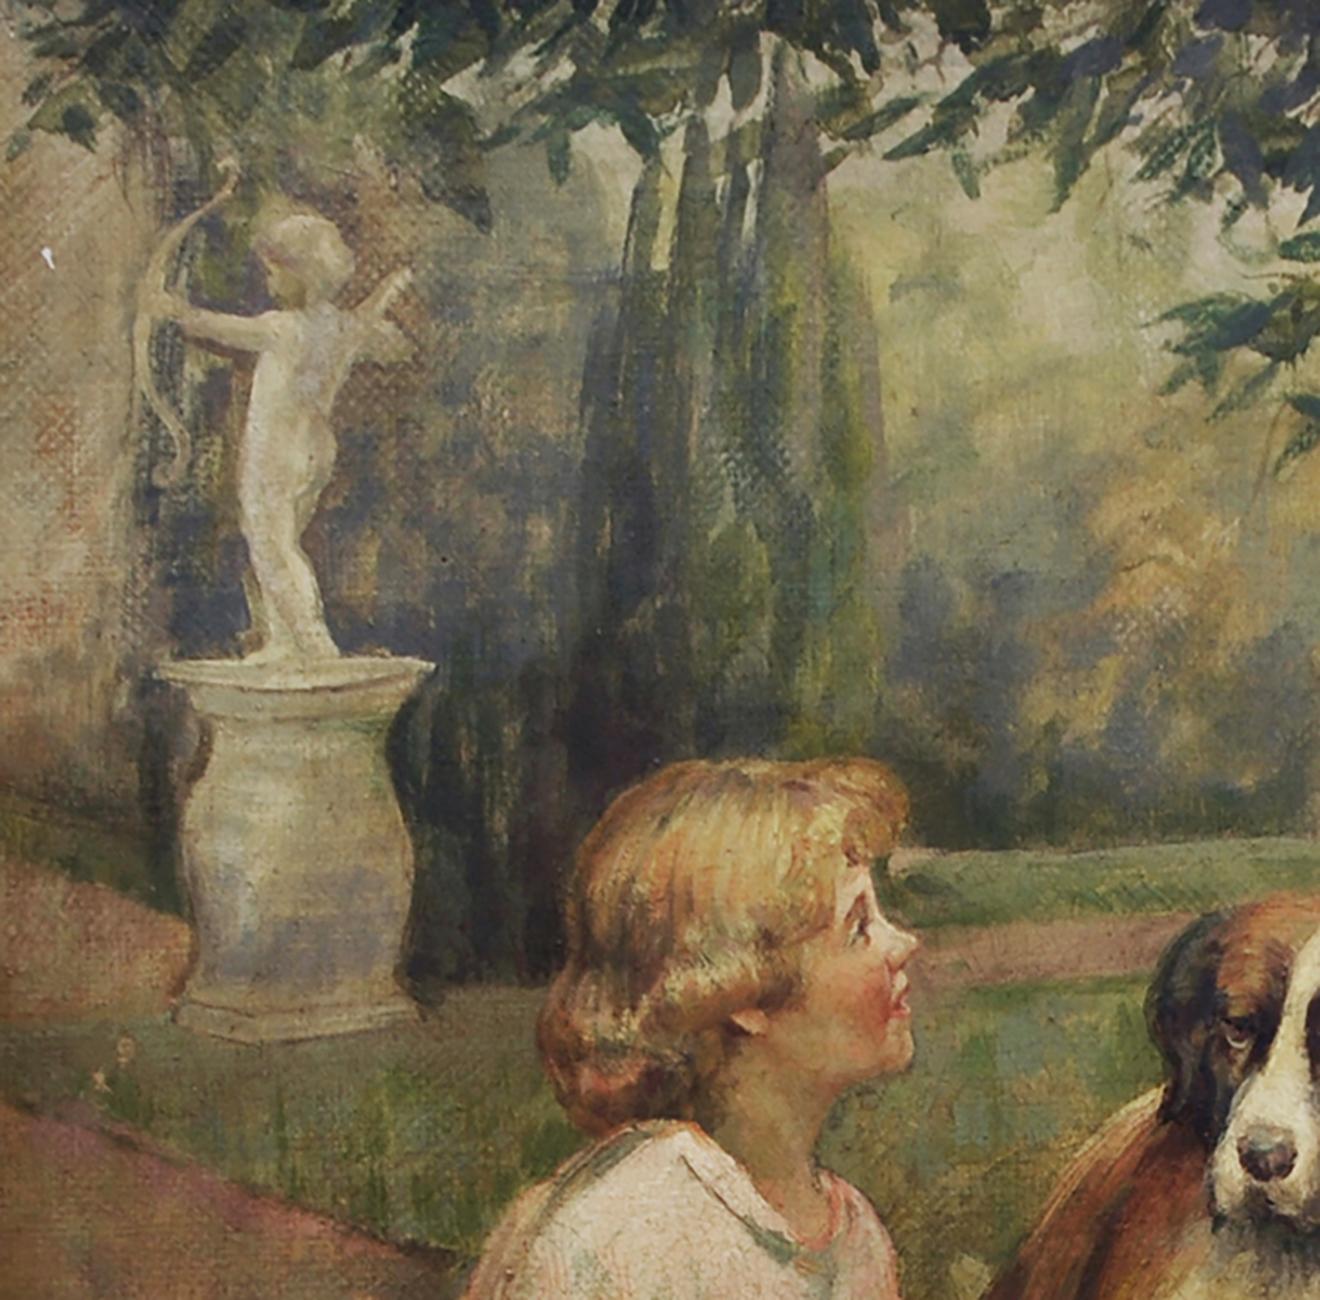 Children with dog  Jean Philipe Moreno Italia 2002  Oil on canvas mis. cm. 70x55 

Moreno is a traditional painter who observes and studies the great masters of the 18th century, together with his own personality he creates original works with